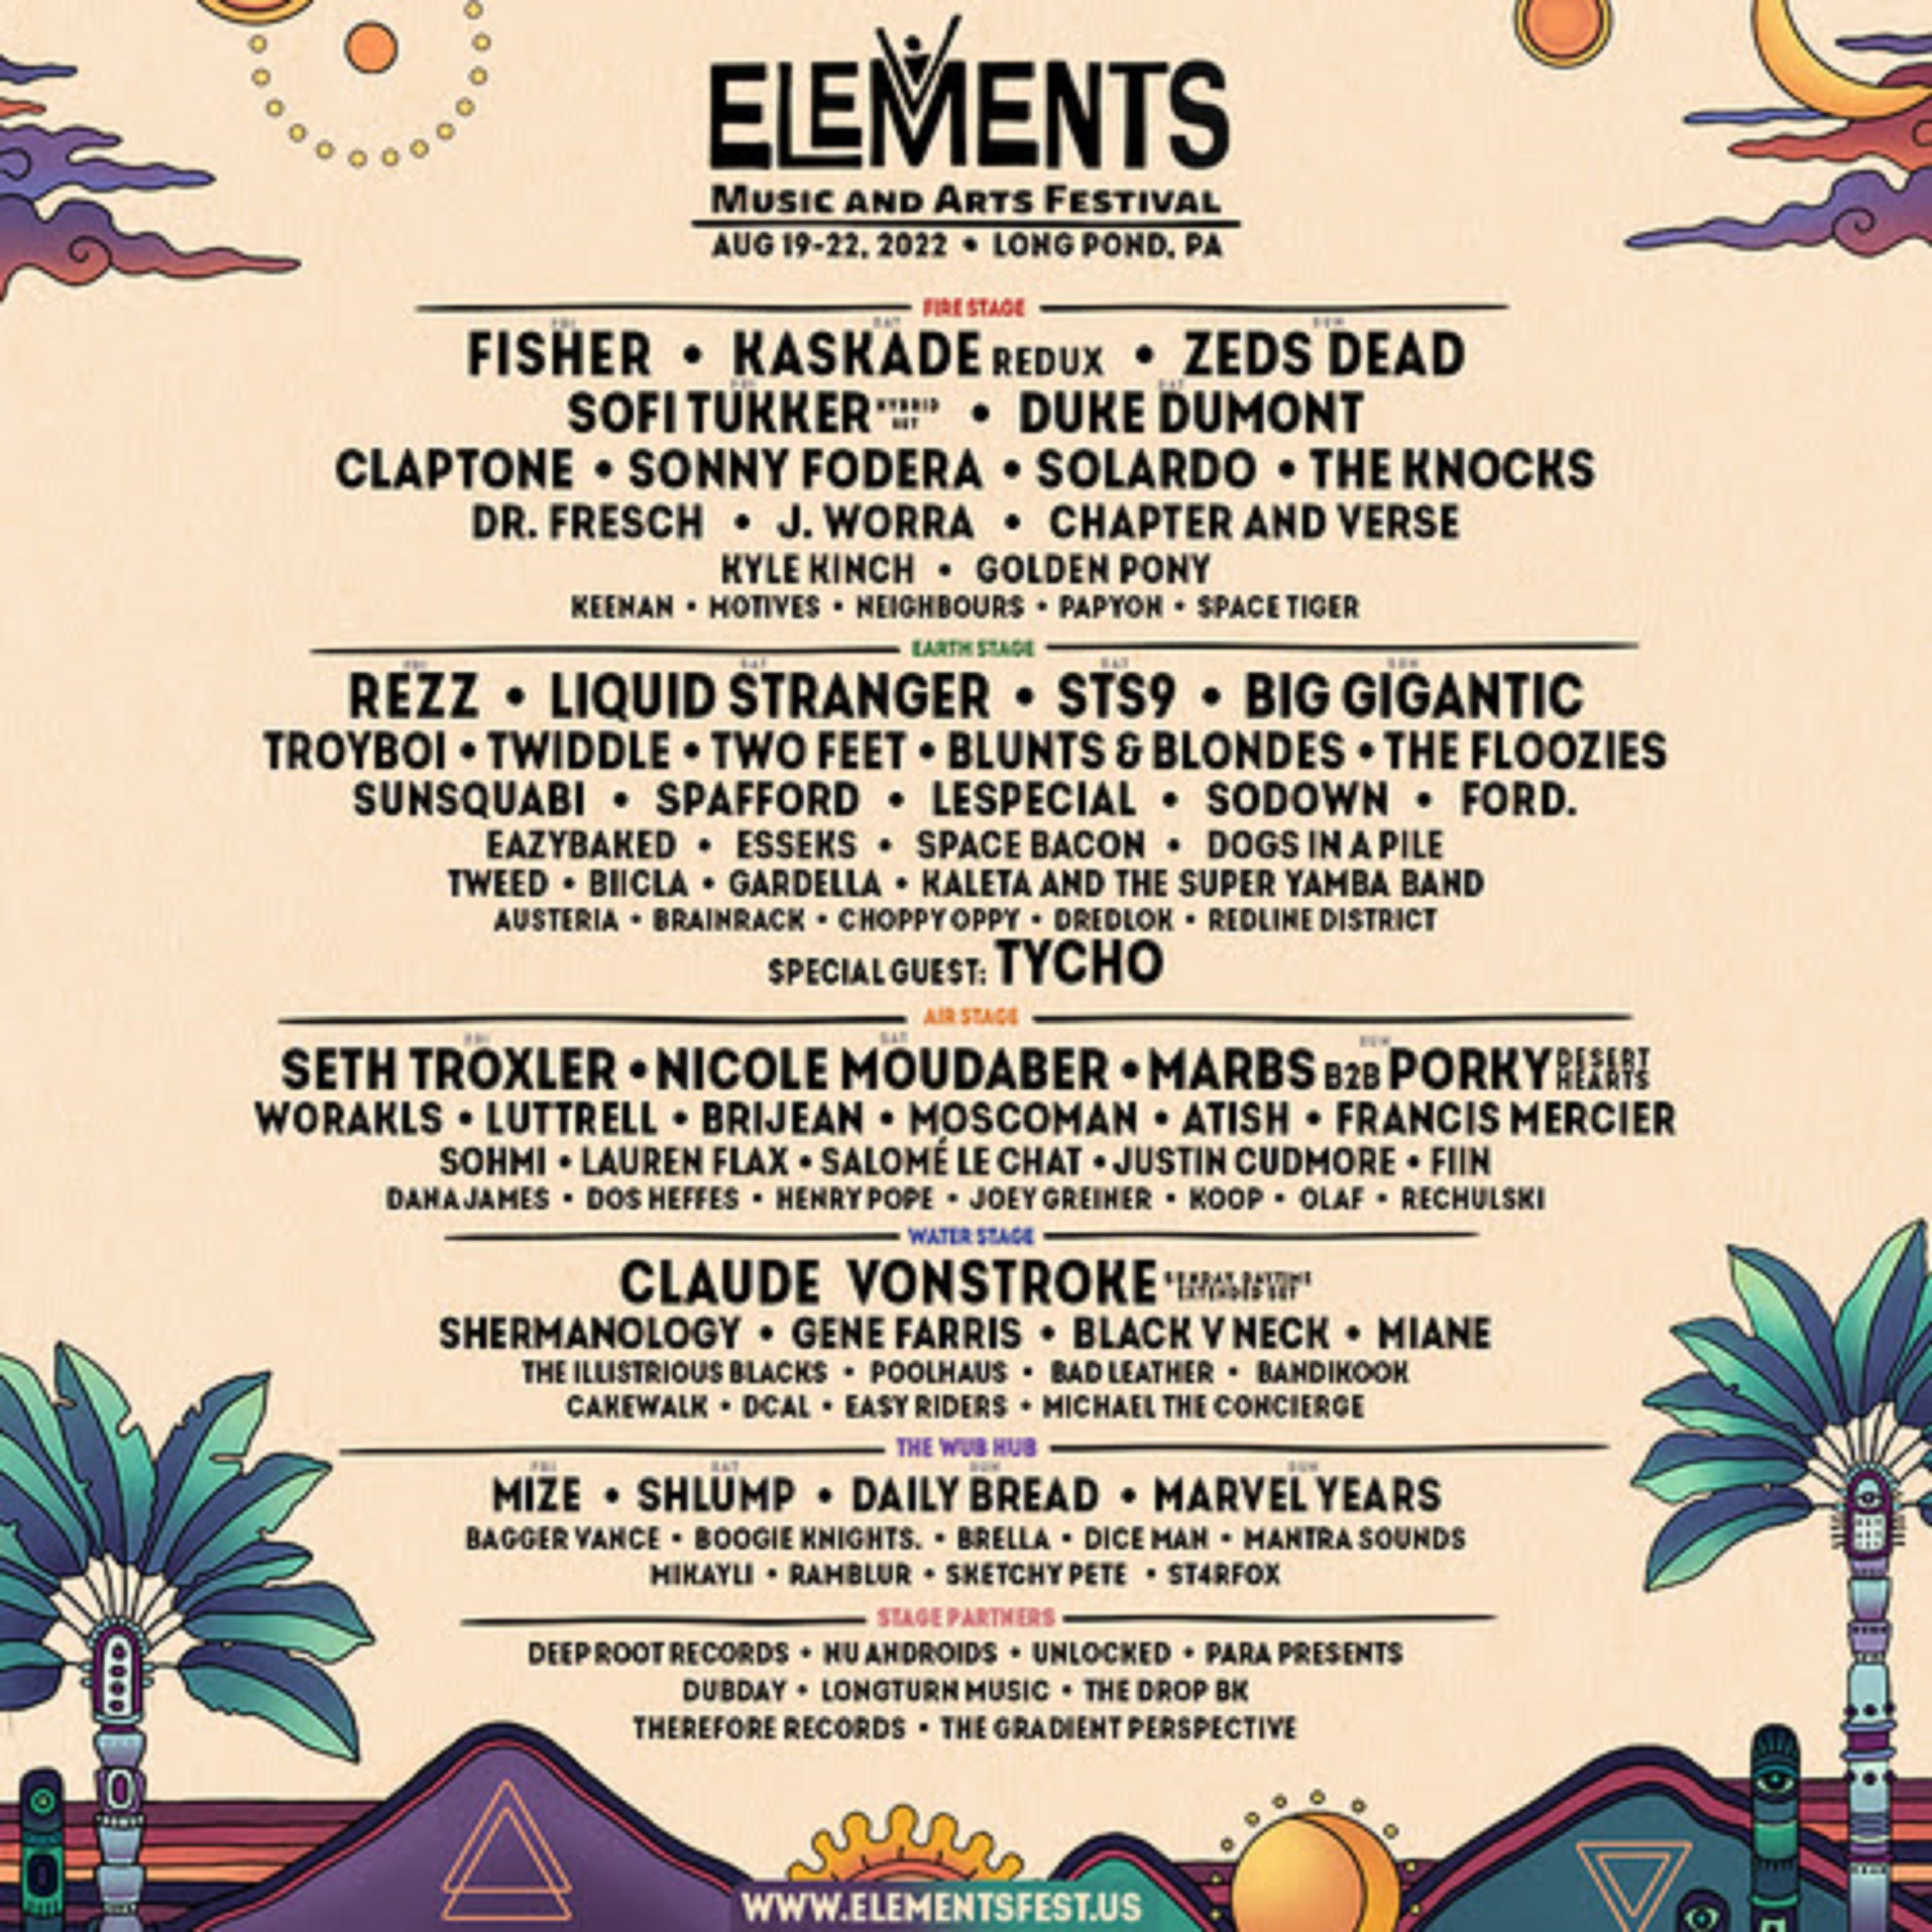 Elements Music & Arts Festival Is Only 4 weeks Away